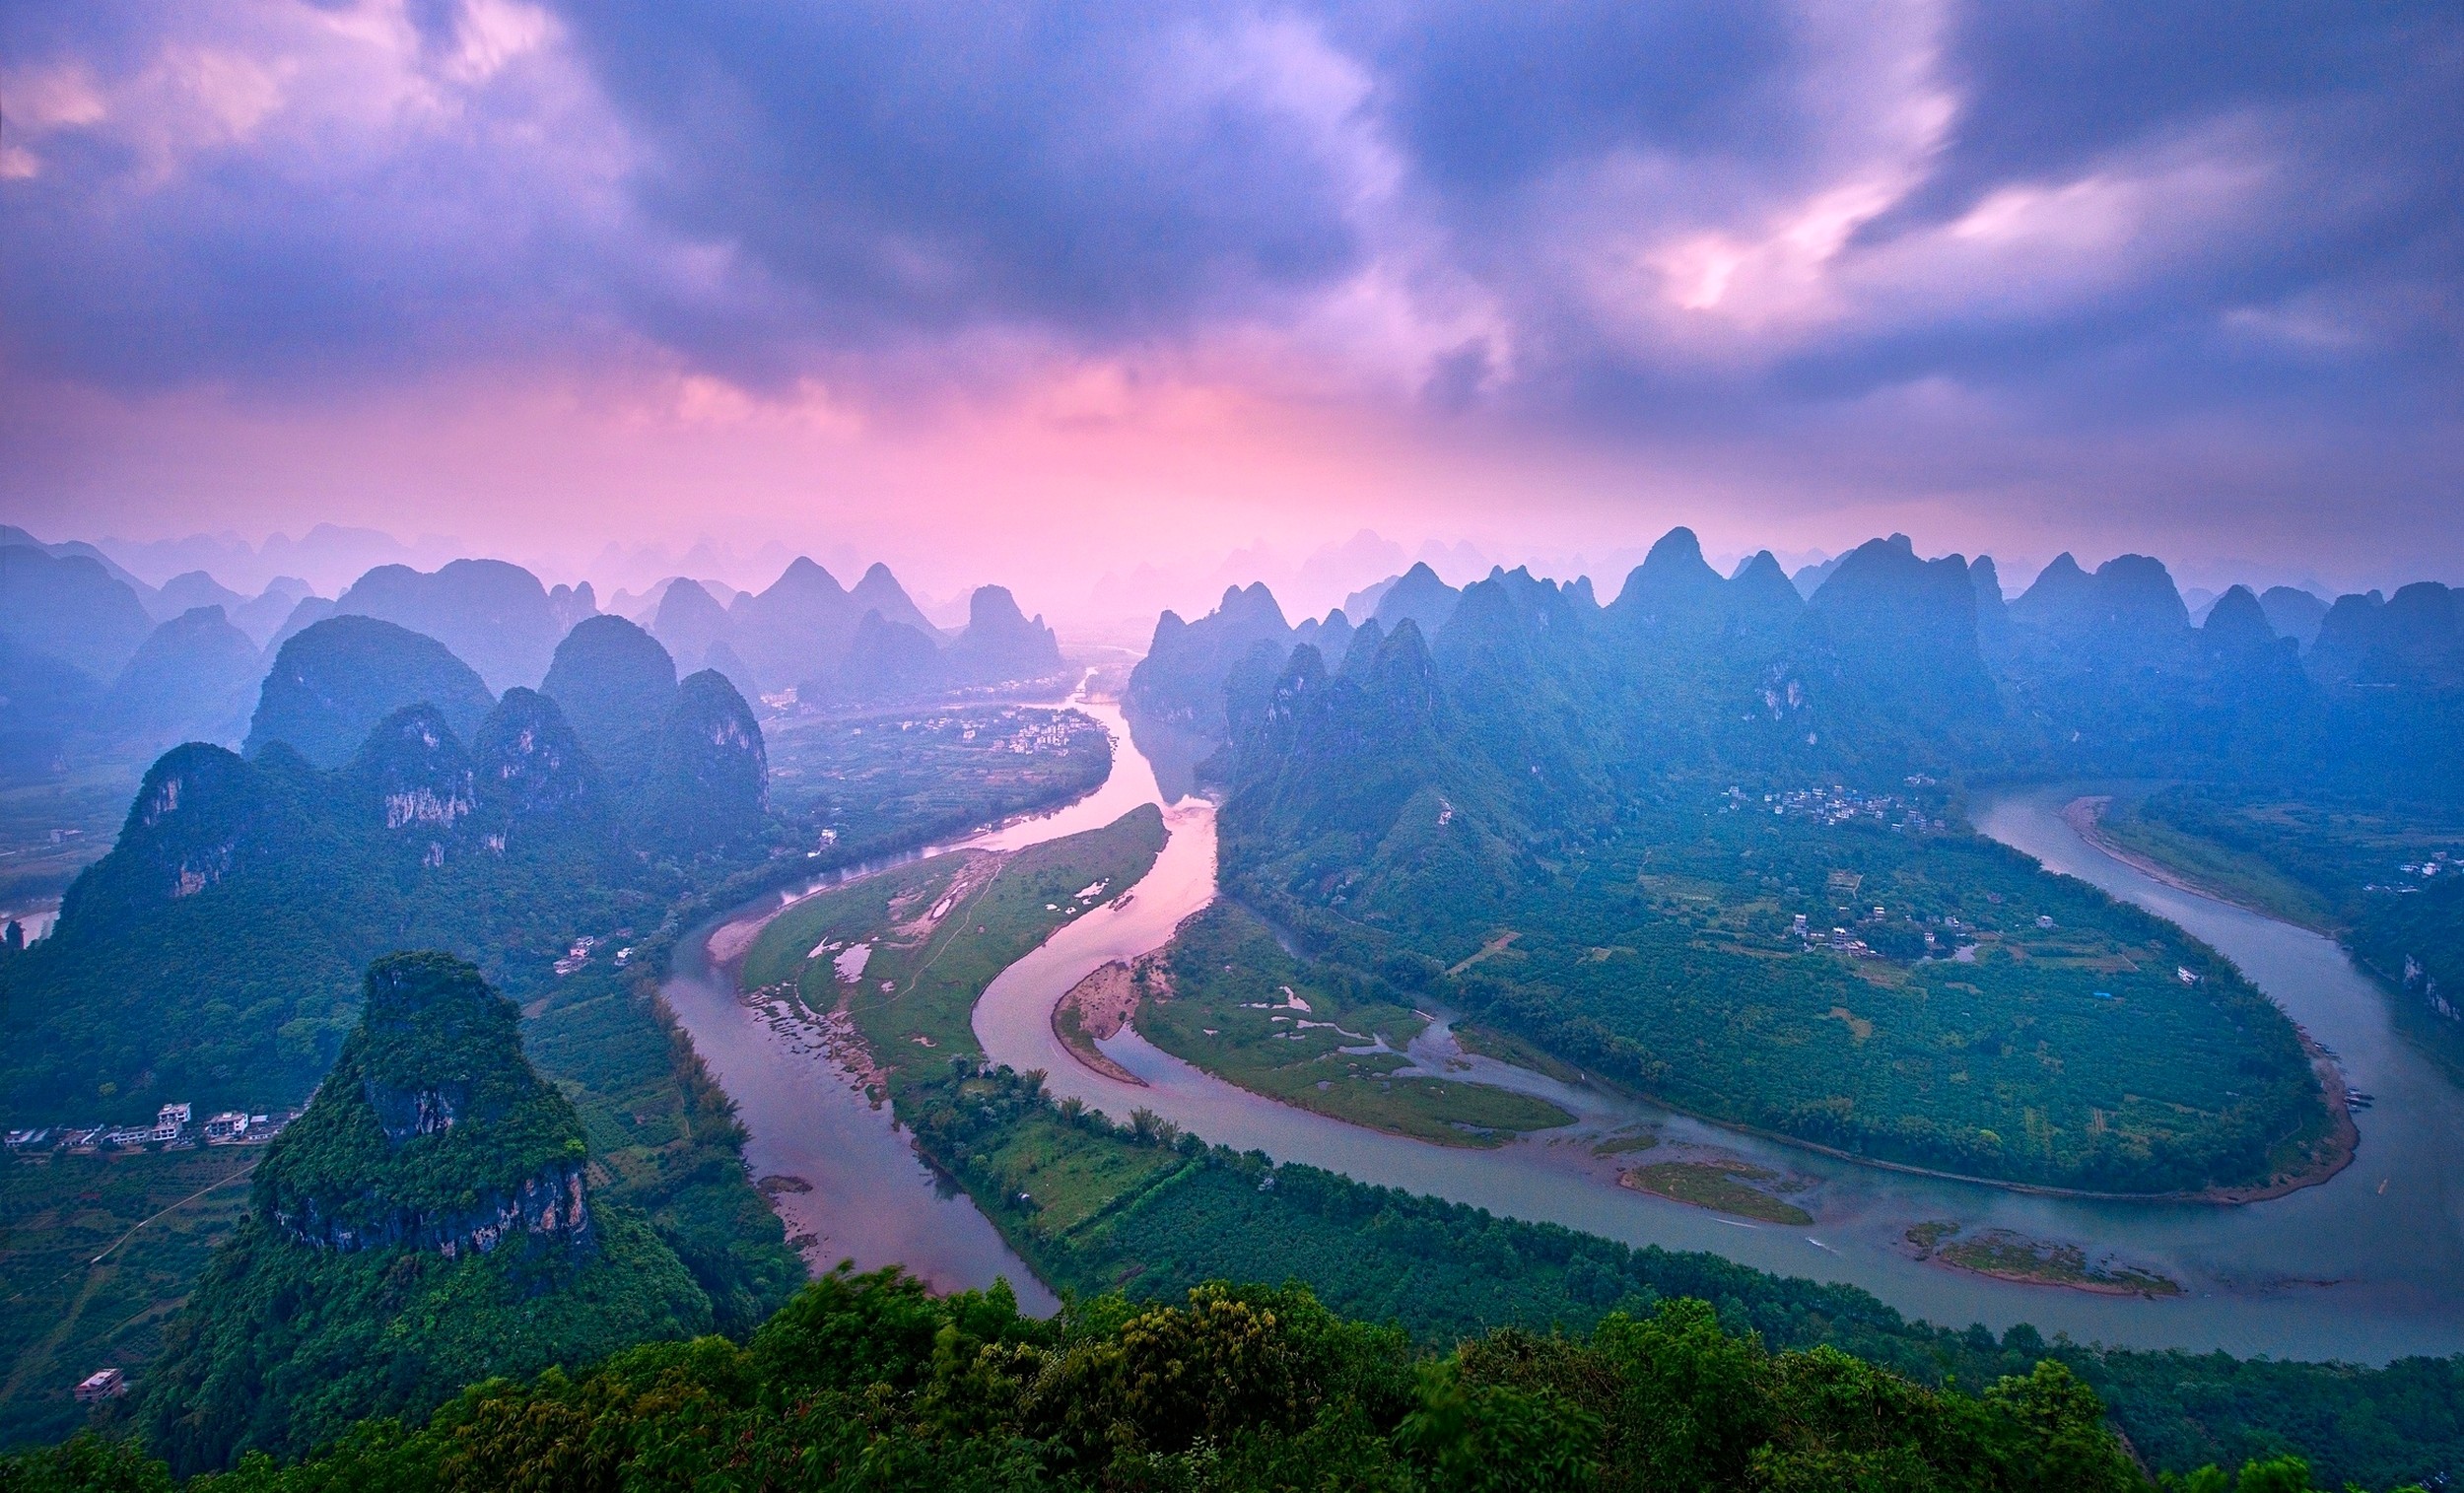 General 2500x1515 landscape river nature mountains China sunset forest clouds town green panorama Asia